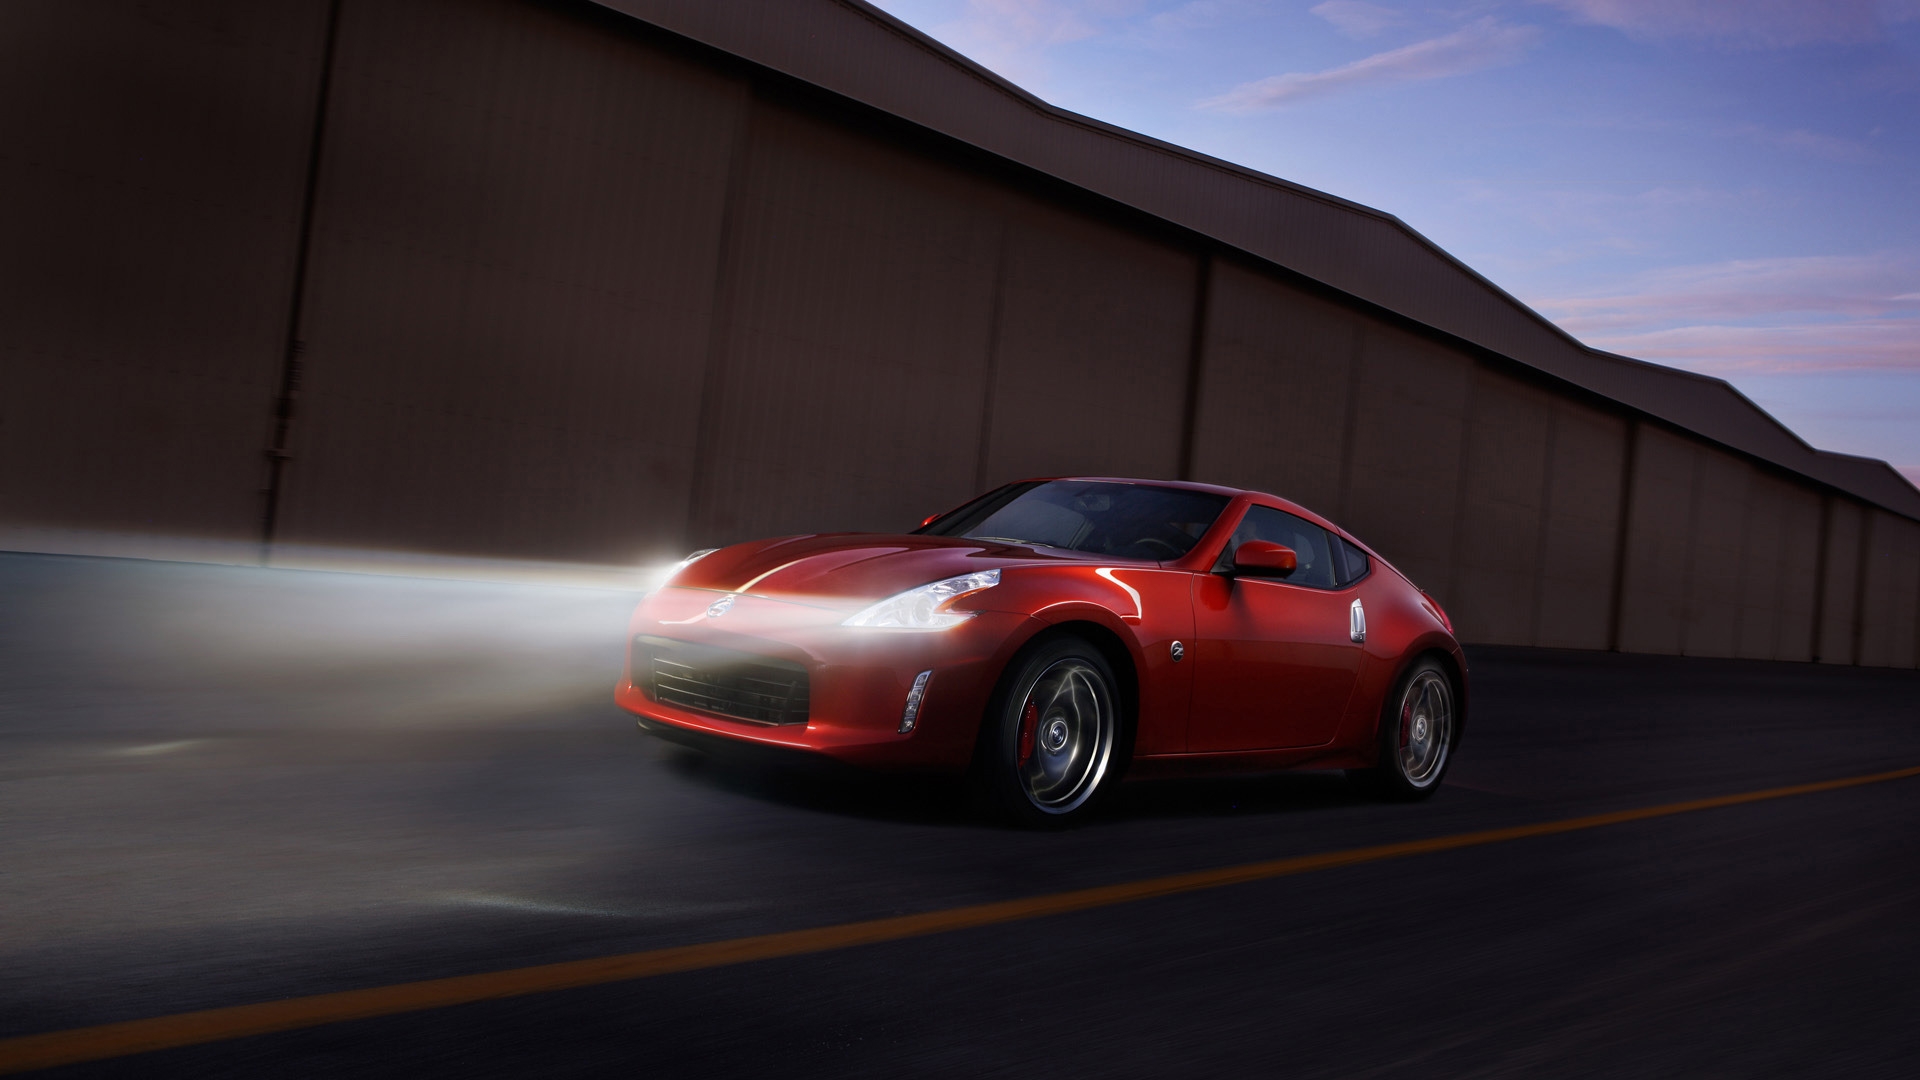 Nissan 370Z Magma Red 2013 for 1920 x 1080 HDTV 1080p resolution